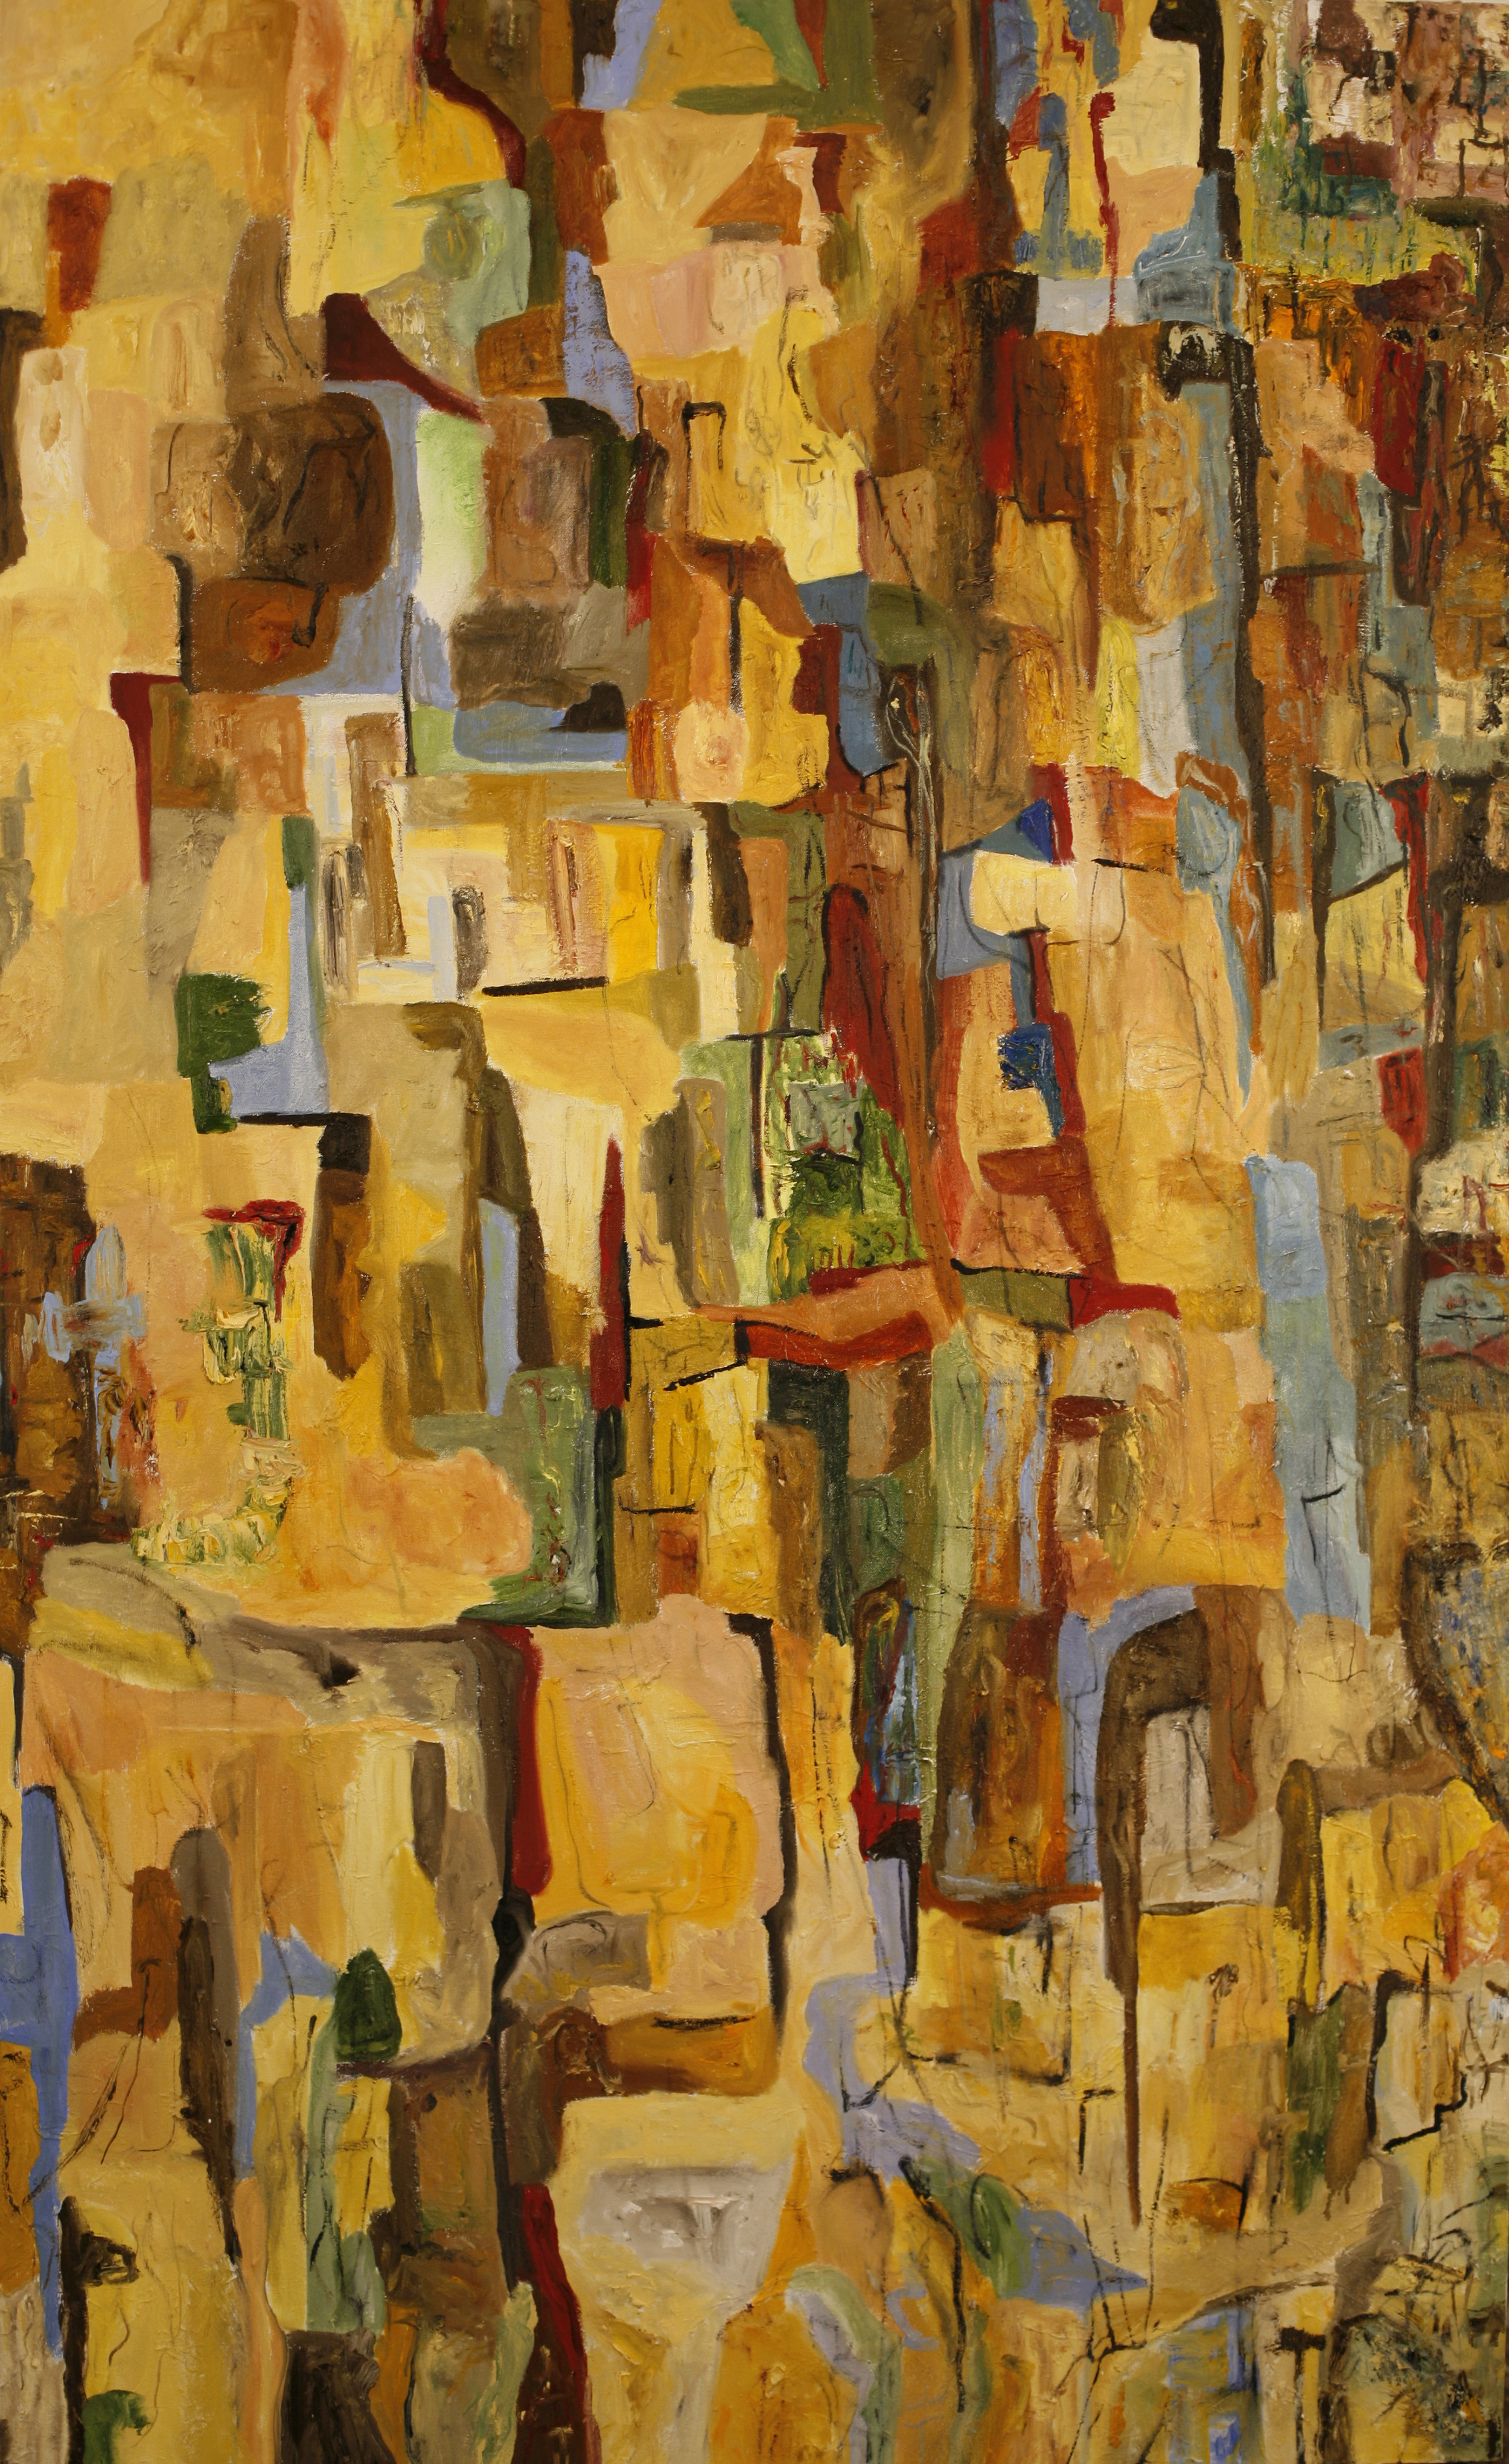 "Flying Through The Key Hole" Structure of Earth #85, oil on canvas, 60"x36"